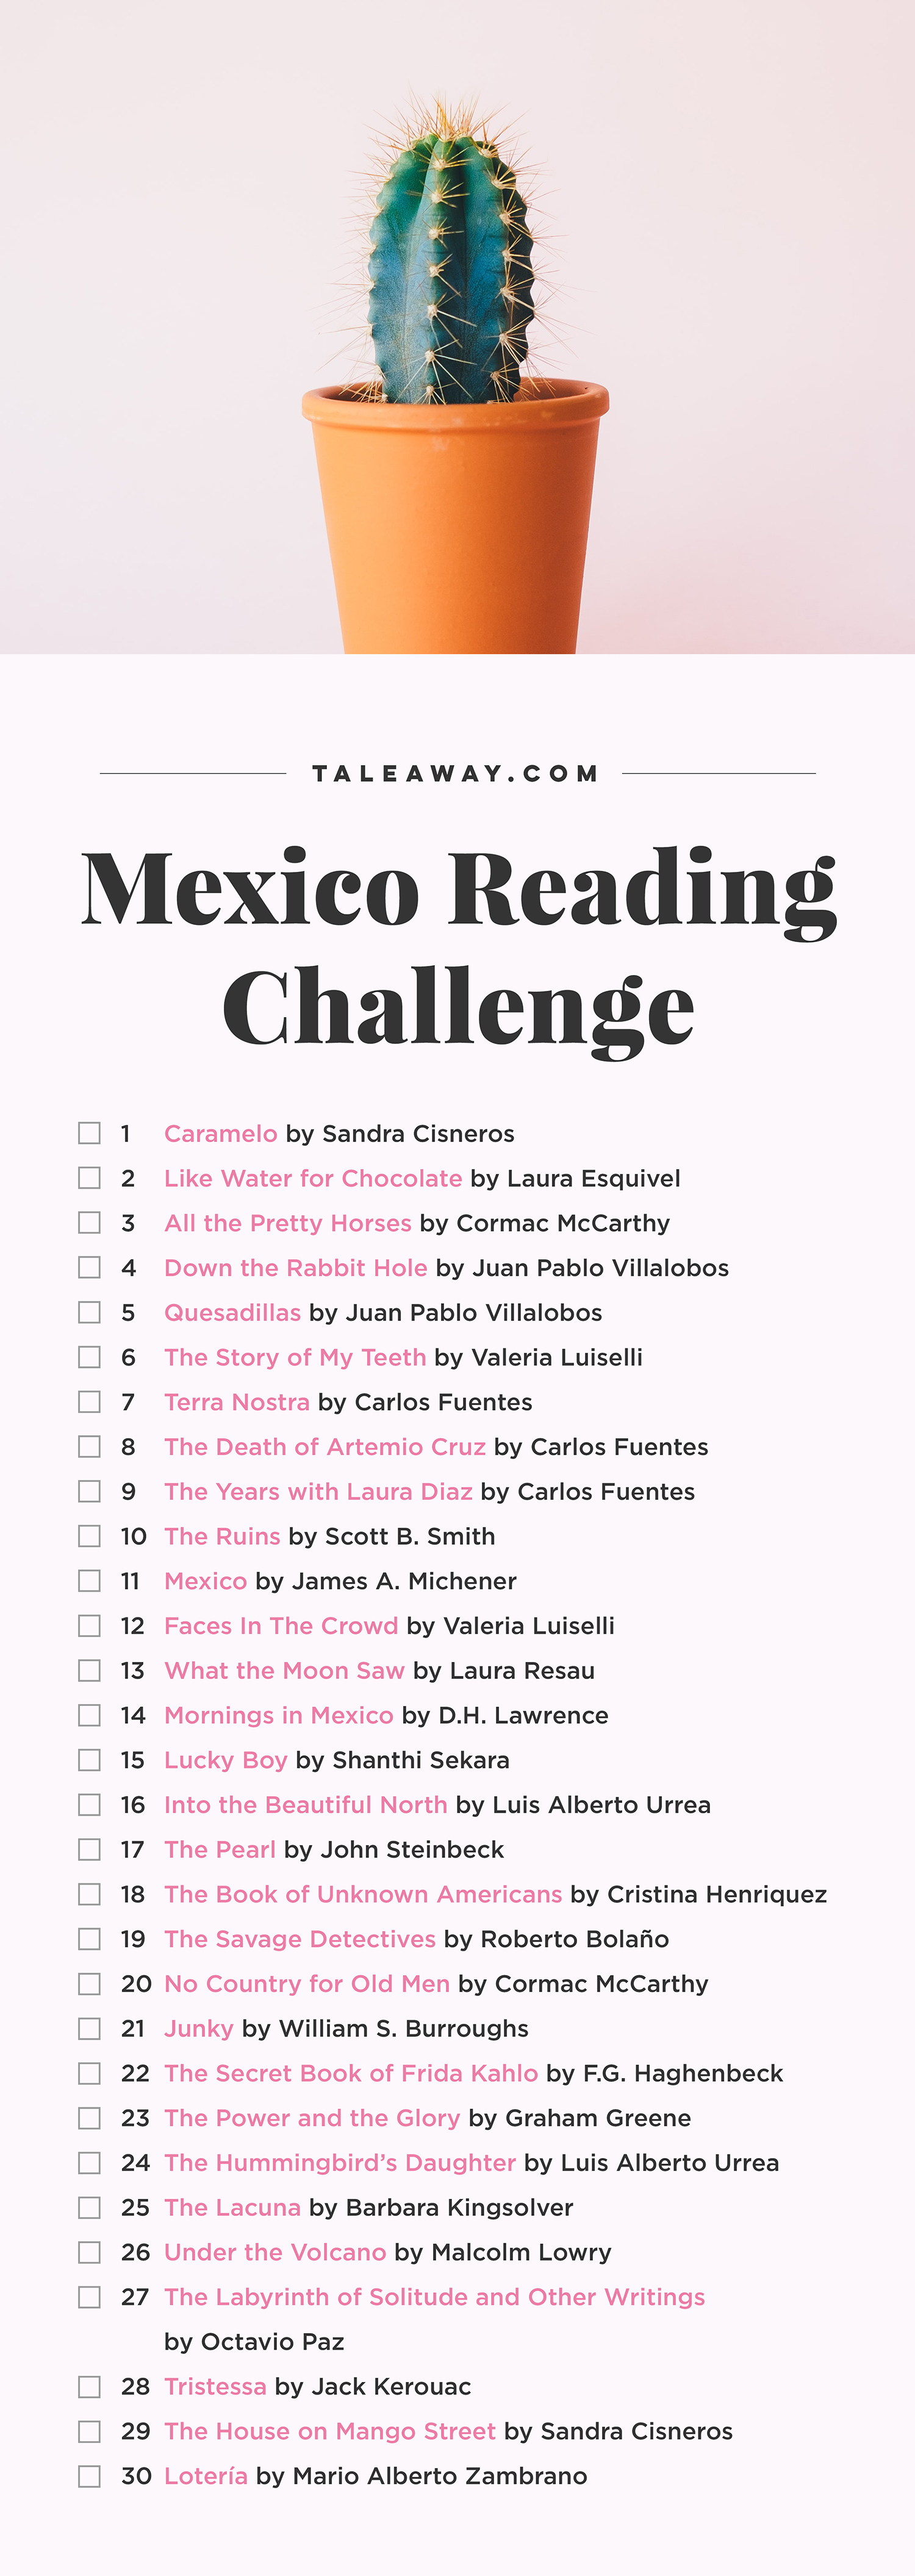 Mexico Reading Challenge, Books Set In Mexico - For more books visit www.taleway.com to find books set around the world. Ideas for those who like to travel, both in life and in fiction. reading challenge, mexico reading challenge, book challenge, books you must read, books from around the world, world books, books and travel, travel reading list, reading list, books around the world, books to read, mexico books, mexico books novels, mexico travel